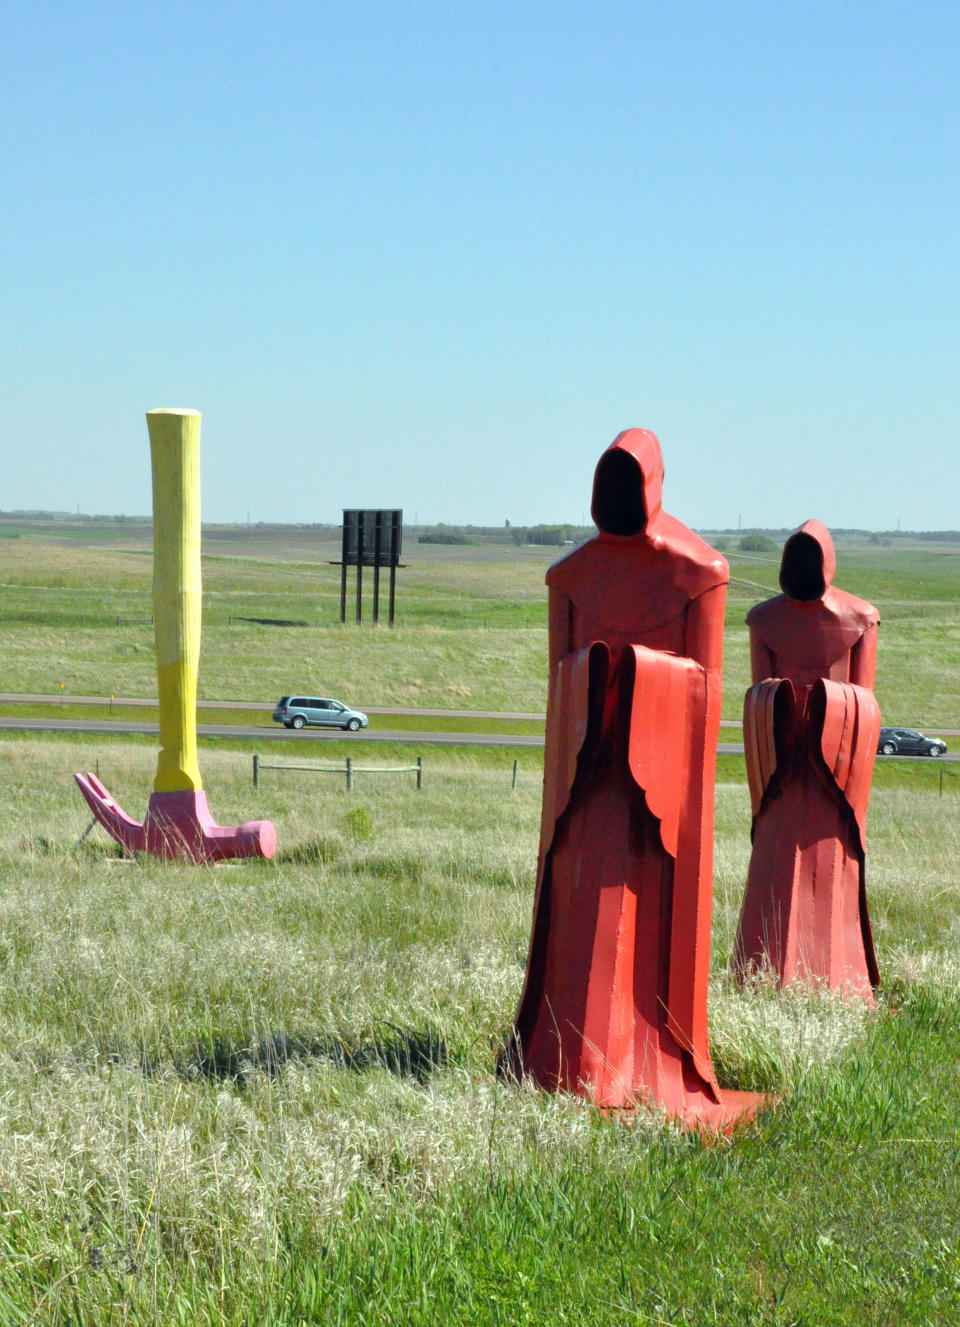 In this May 10, 2012 photo, a pair of monks and an upside-down hammer stand firm in the breeze as cars whiz by Porter Sculpture Park, in Montrose, S.D. The roadside attraction off Interstate 90 features more than 40 metal sculptures. The park’s signature piece is a 60-foot-tall Egyptian-style bull’s head that stares down at motorists as they head out to South Dakota’s Black Hills. Wayne Porter spent three years creating the 25-ton monstrosity out of railroad tie plates, dubbing it “The World’s Largest Bull’s Head” on a nearby billboard. (AP Photo/Dirk Lammers)